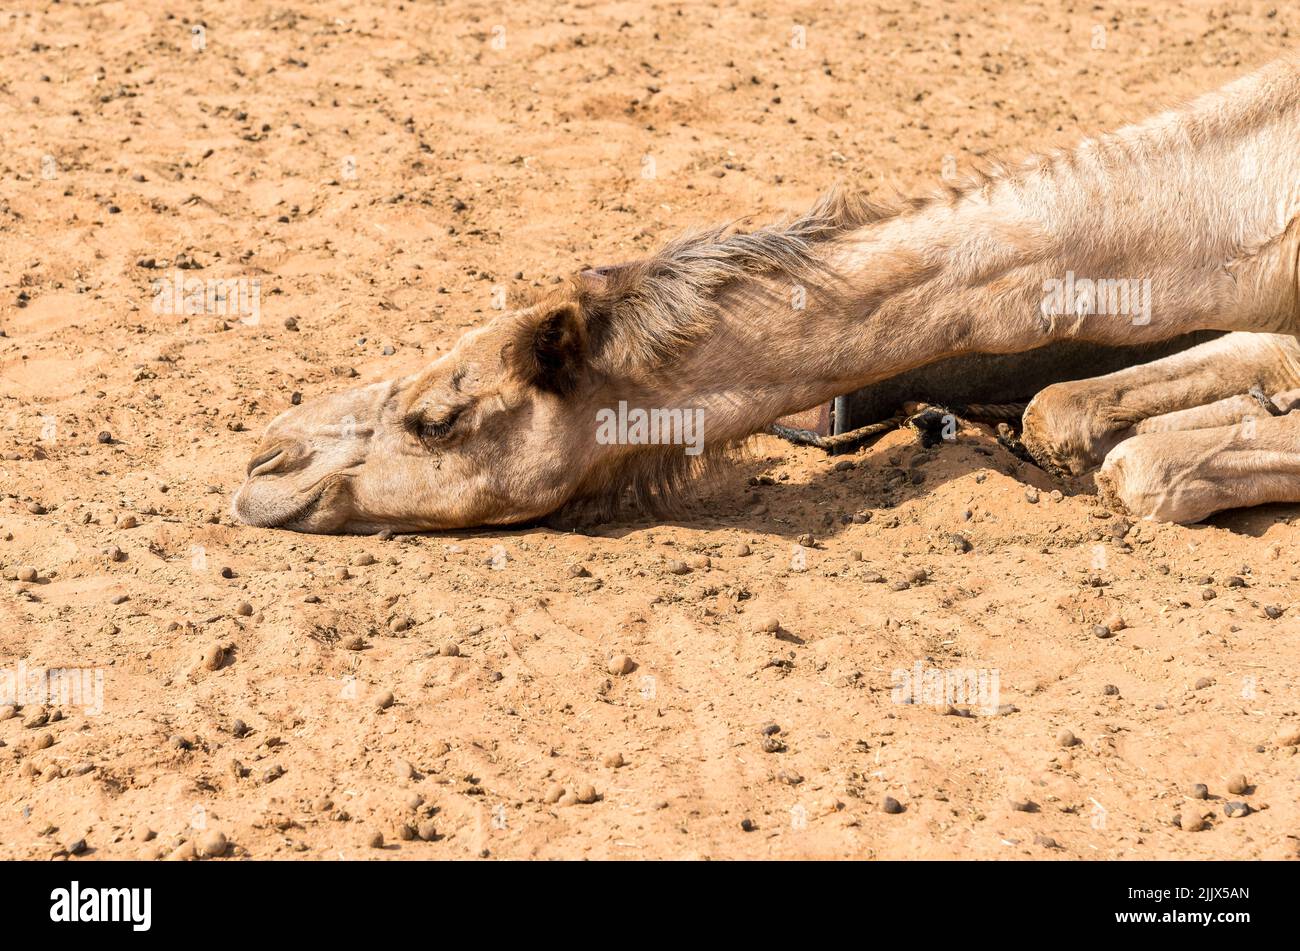 Camel resting on the sand in the Wahiba Sands of desert in Oman. Stock Photo